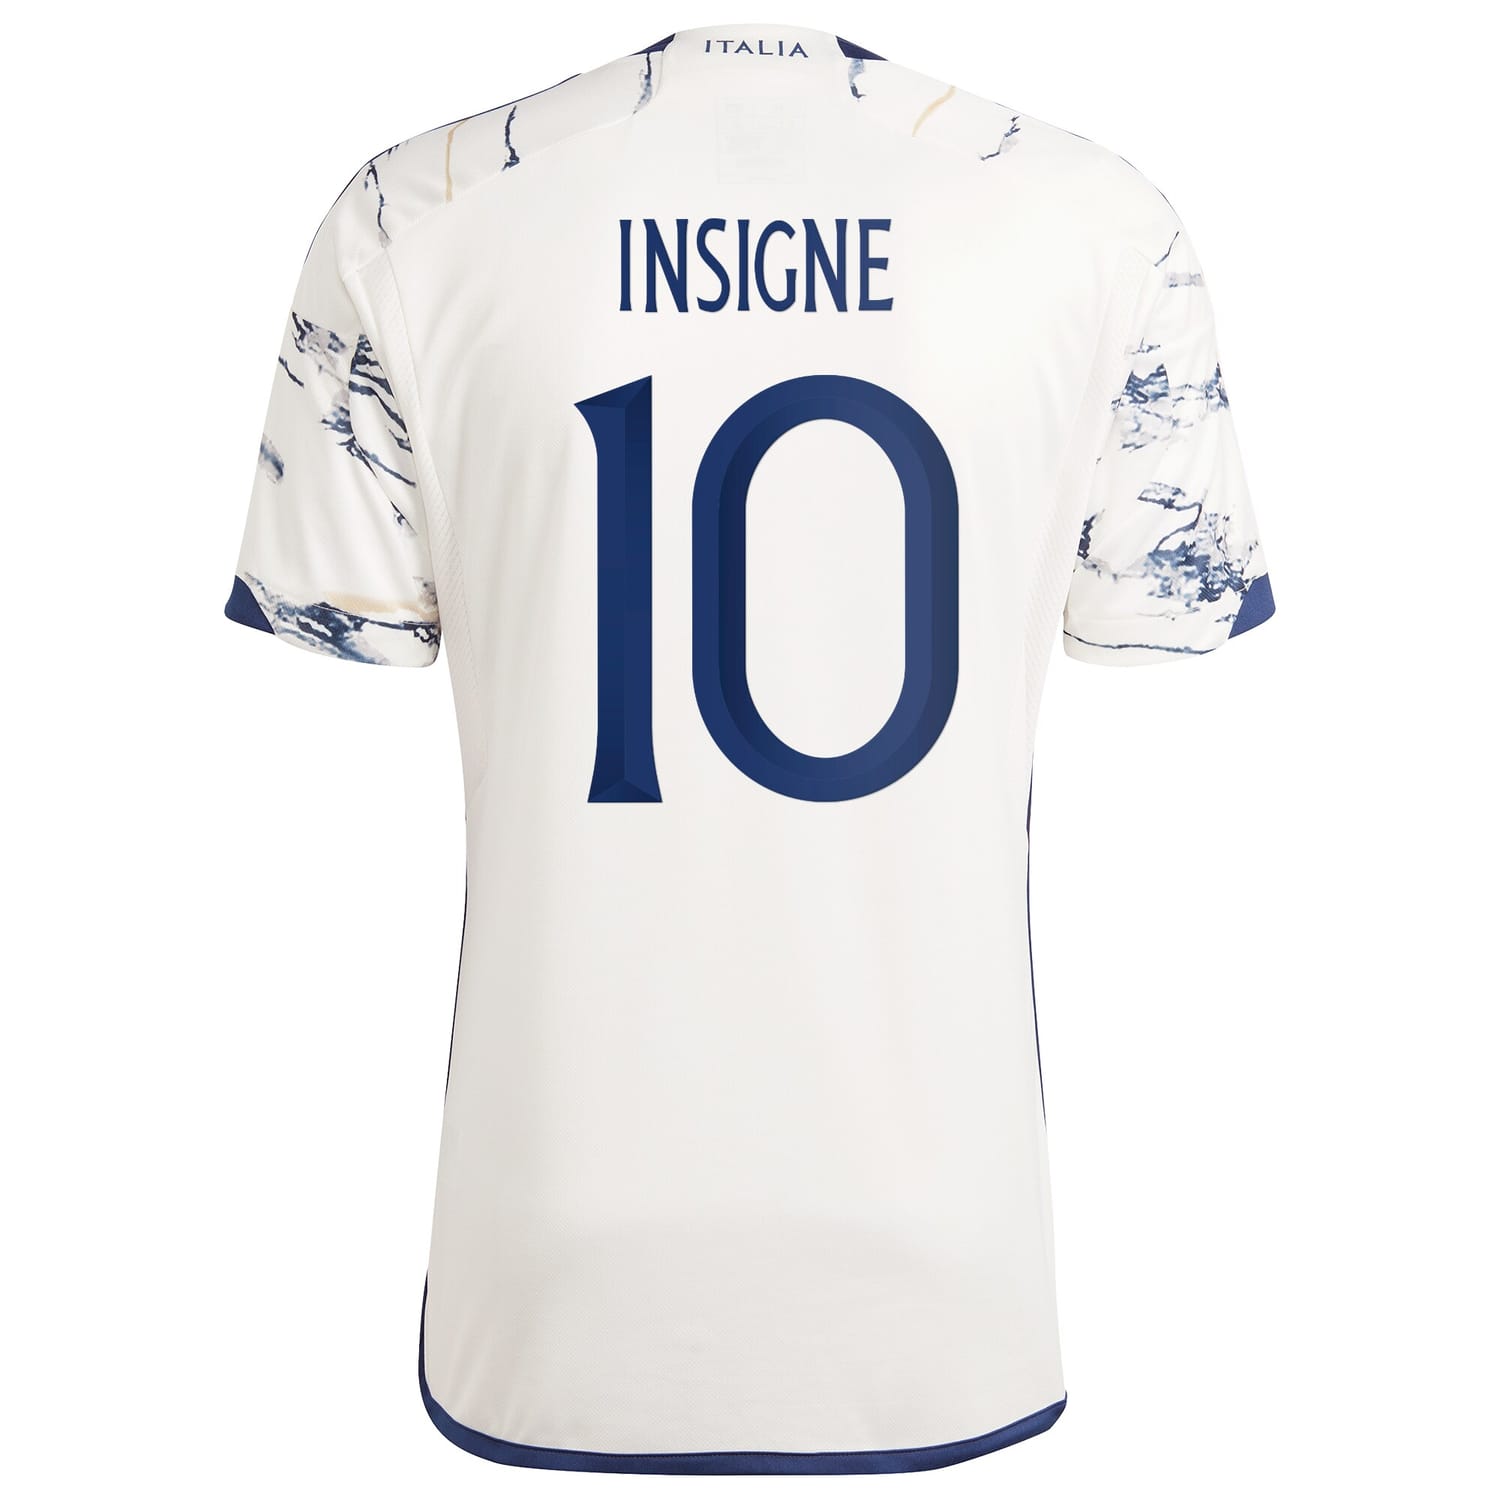 Italy National Team Away Jersey Shirt White 2023 player Lorenzo Insigne printing for Men